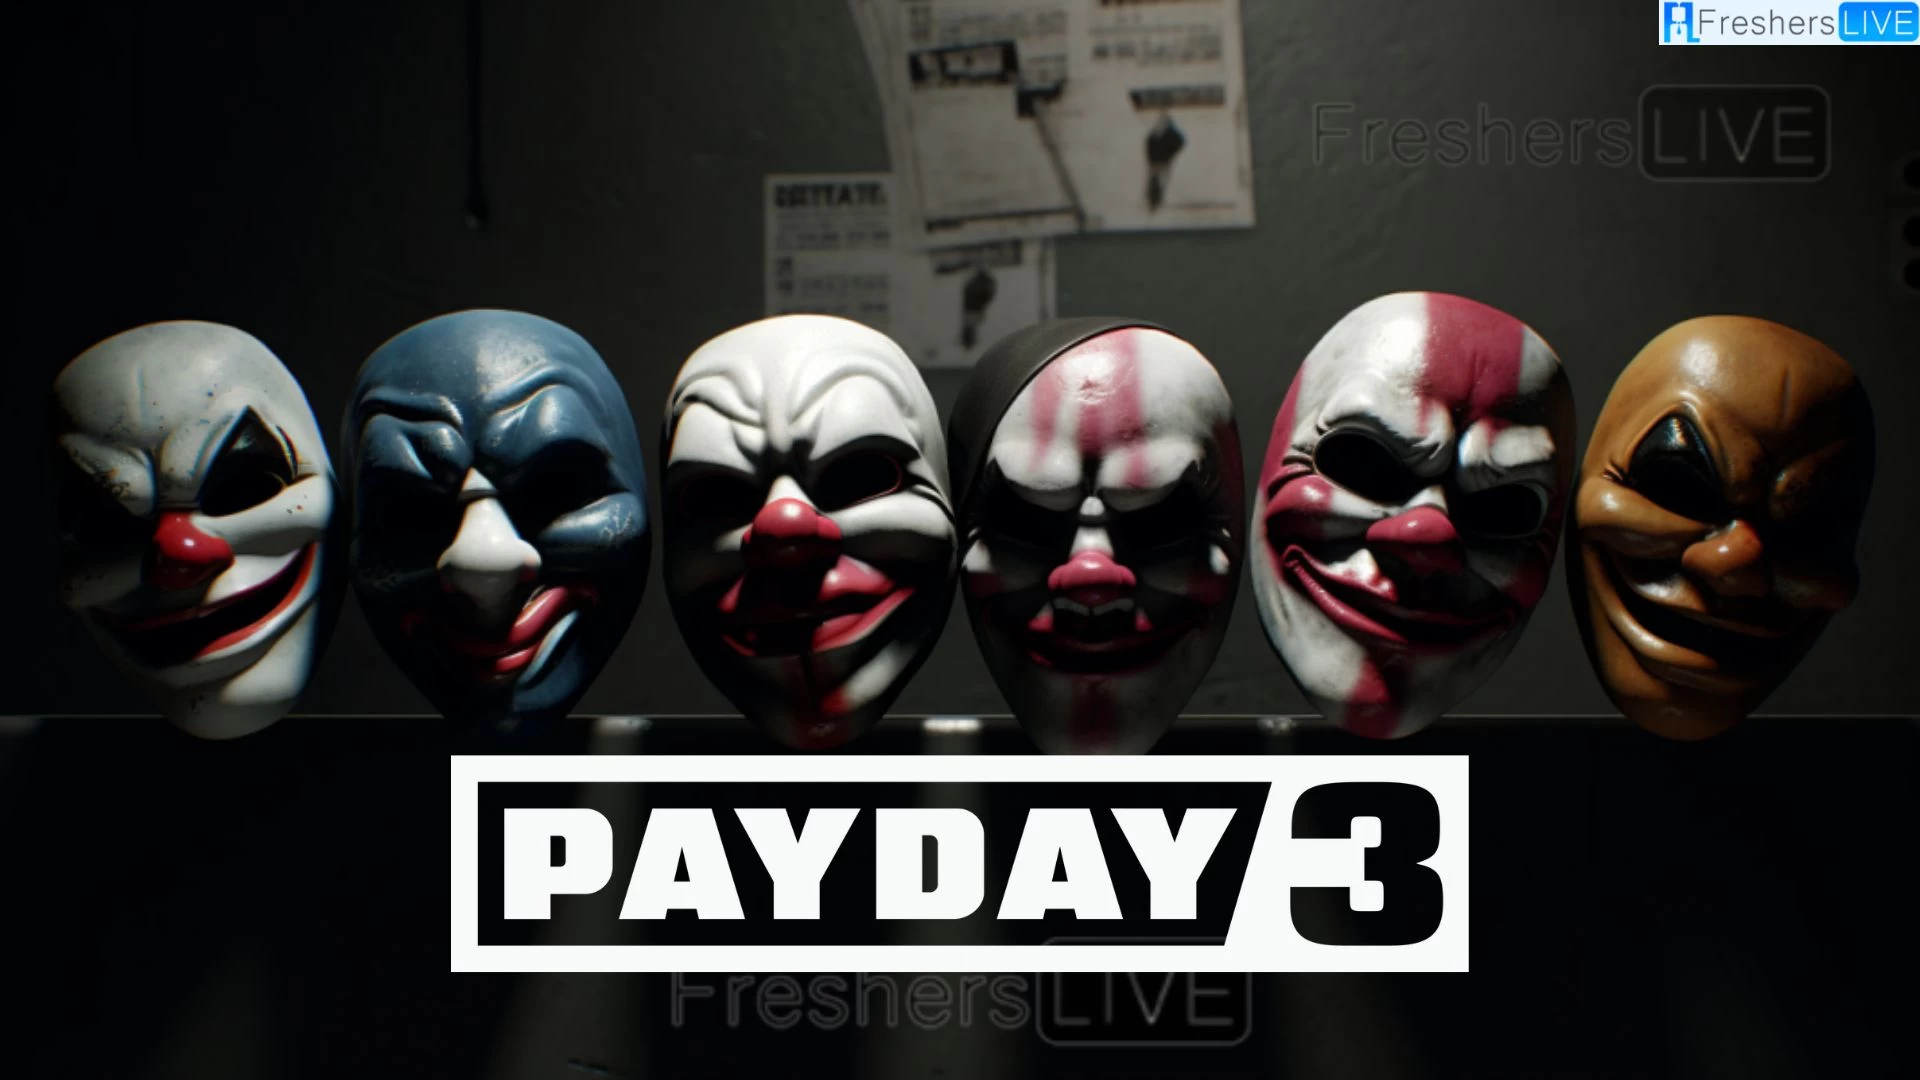 Payday 3 No Rest for the Wicked Vault Codes, How to Get the Correct Vault Code?